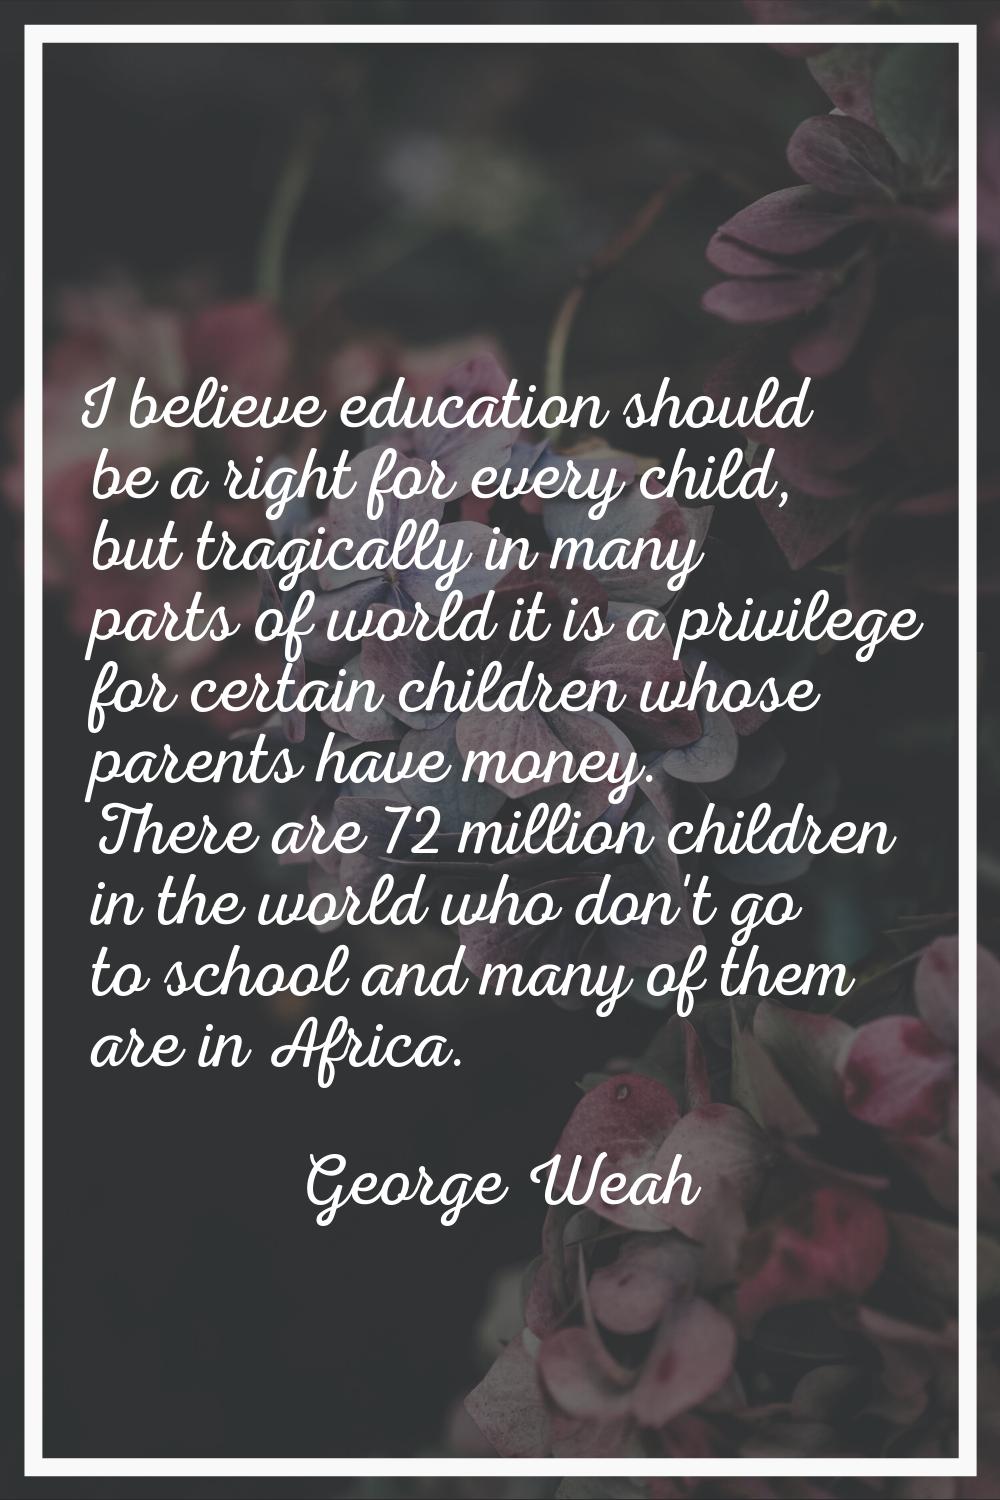 I believe education should be a right for every child, but tragically in many parts of world it is 